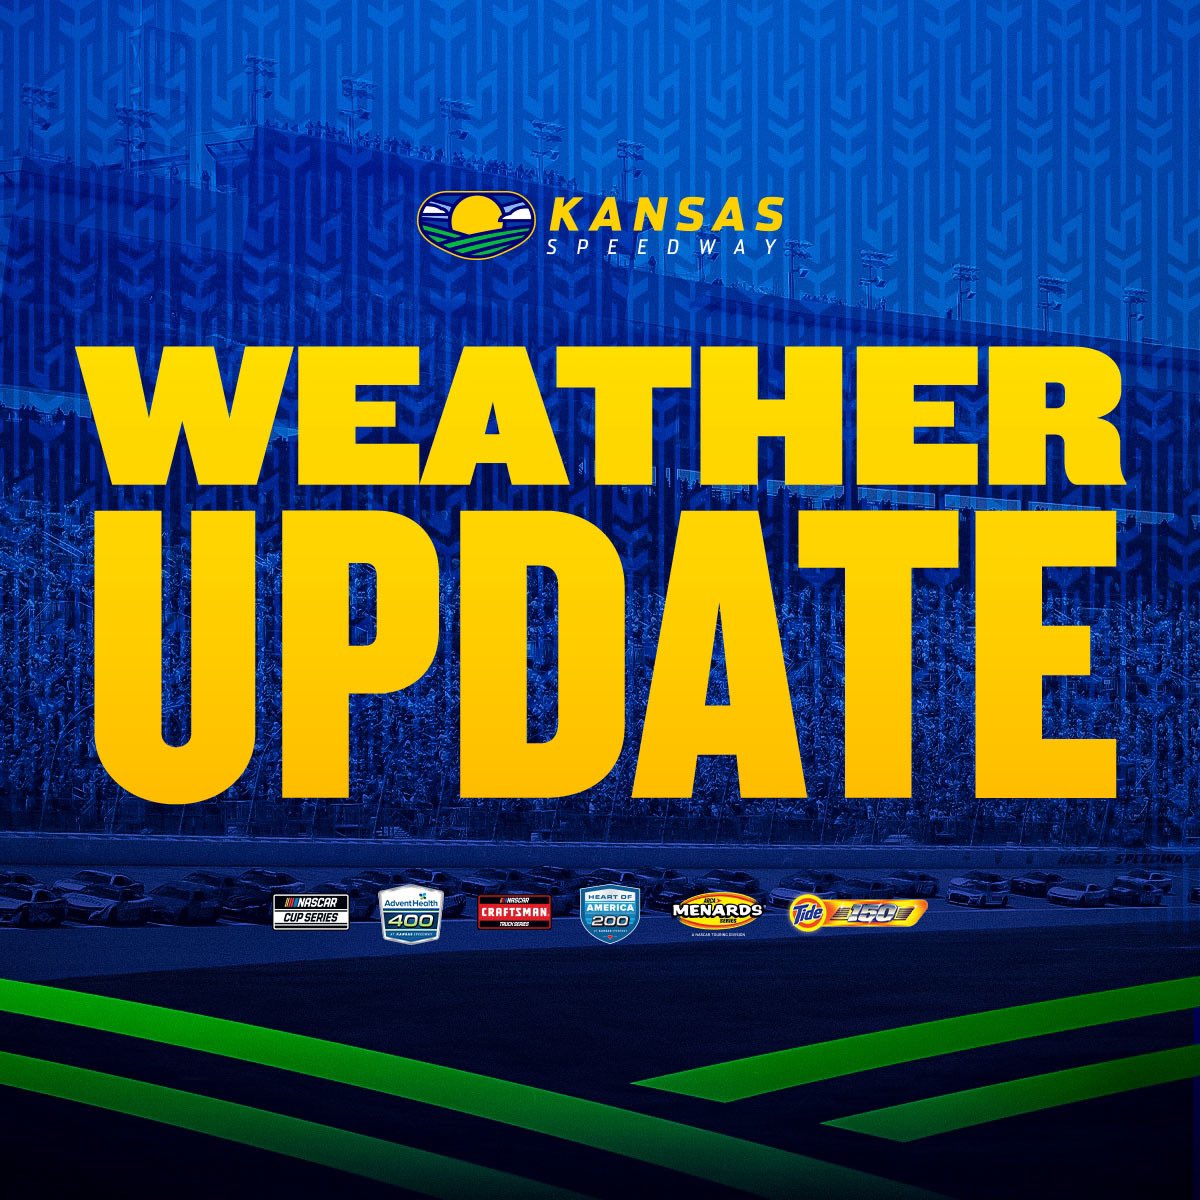 UPDATE: Thunderstorms are approaching the area. 

Please find appropriate shelter and secure items at campsites. Please take necessary precautions.